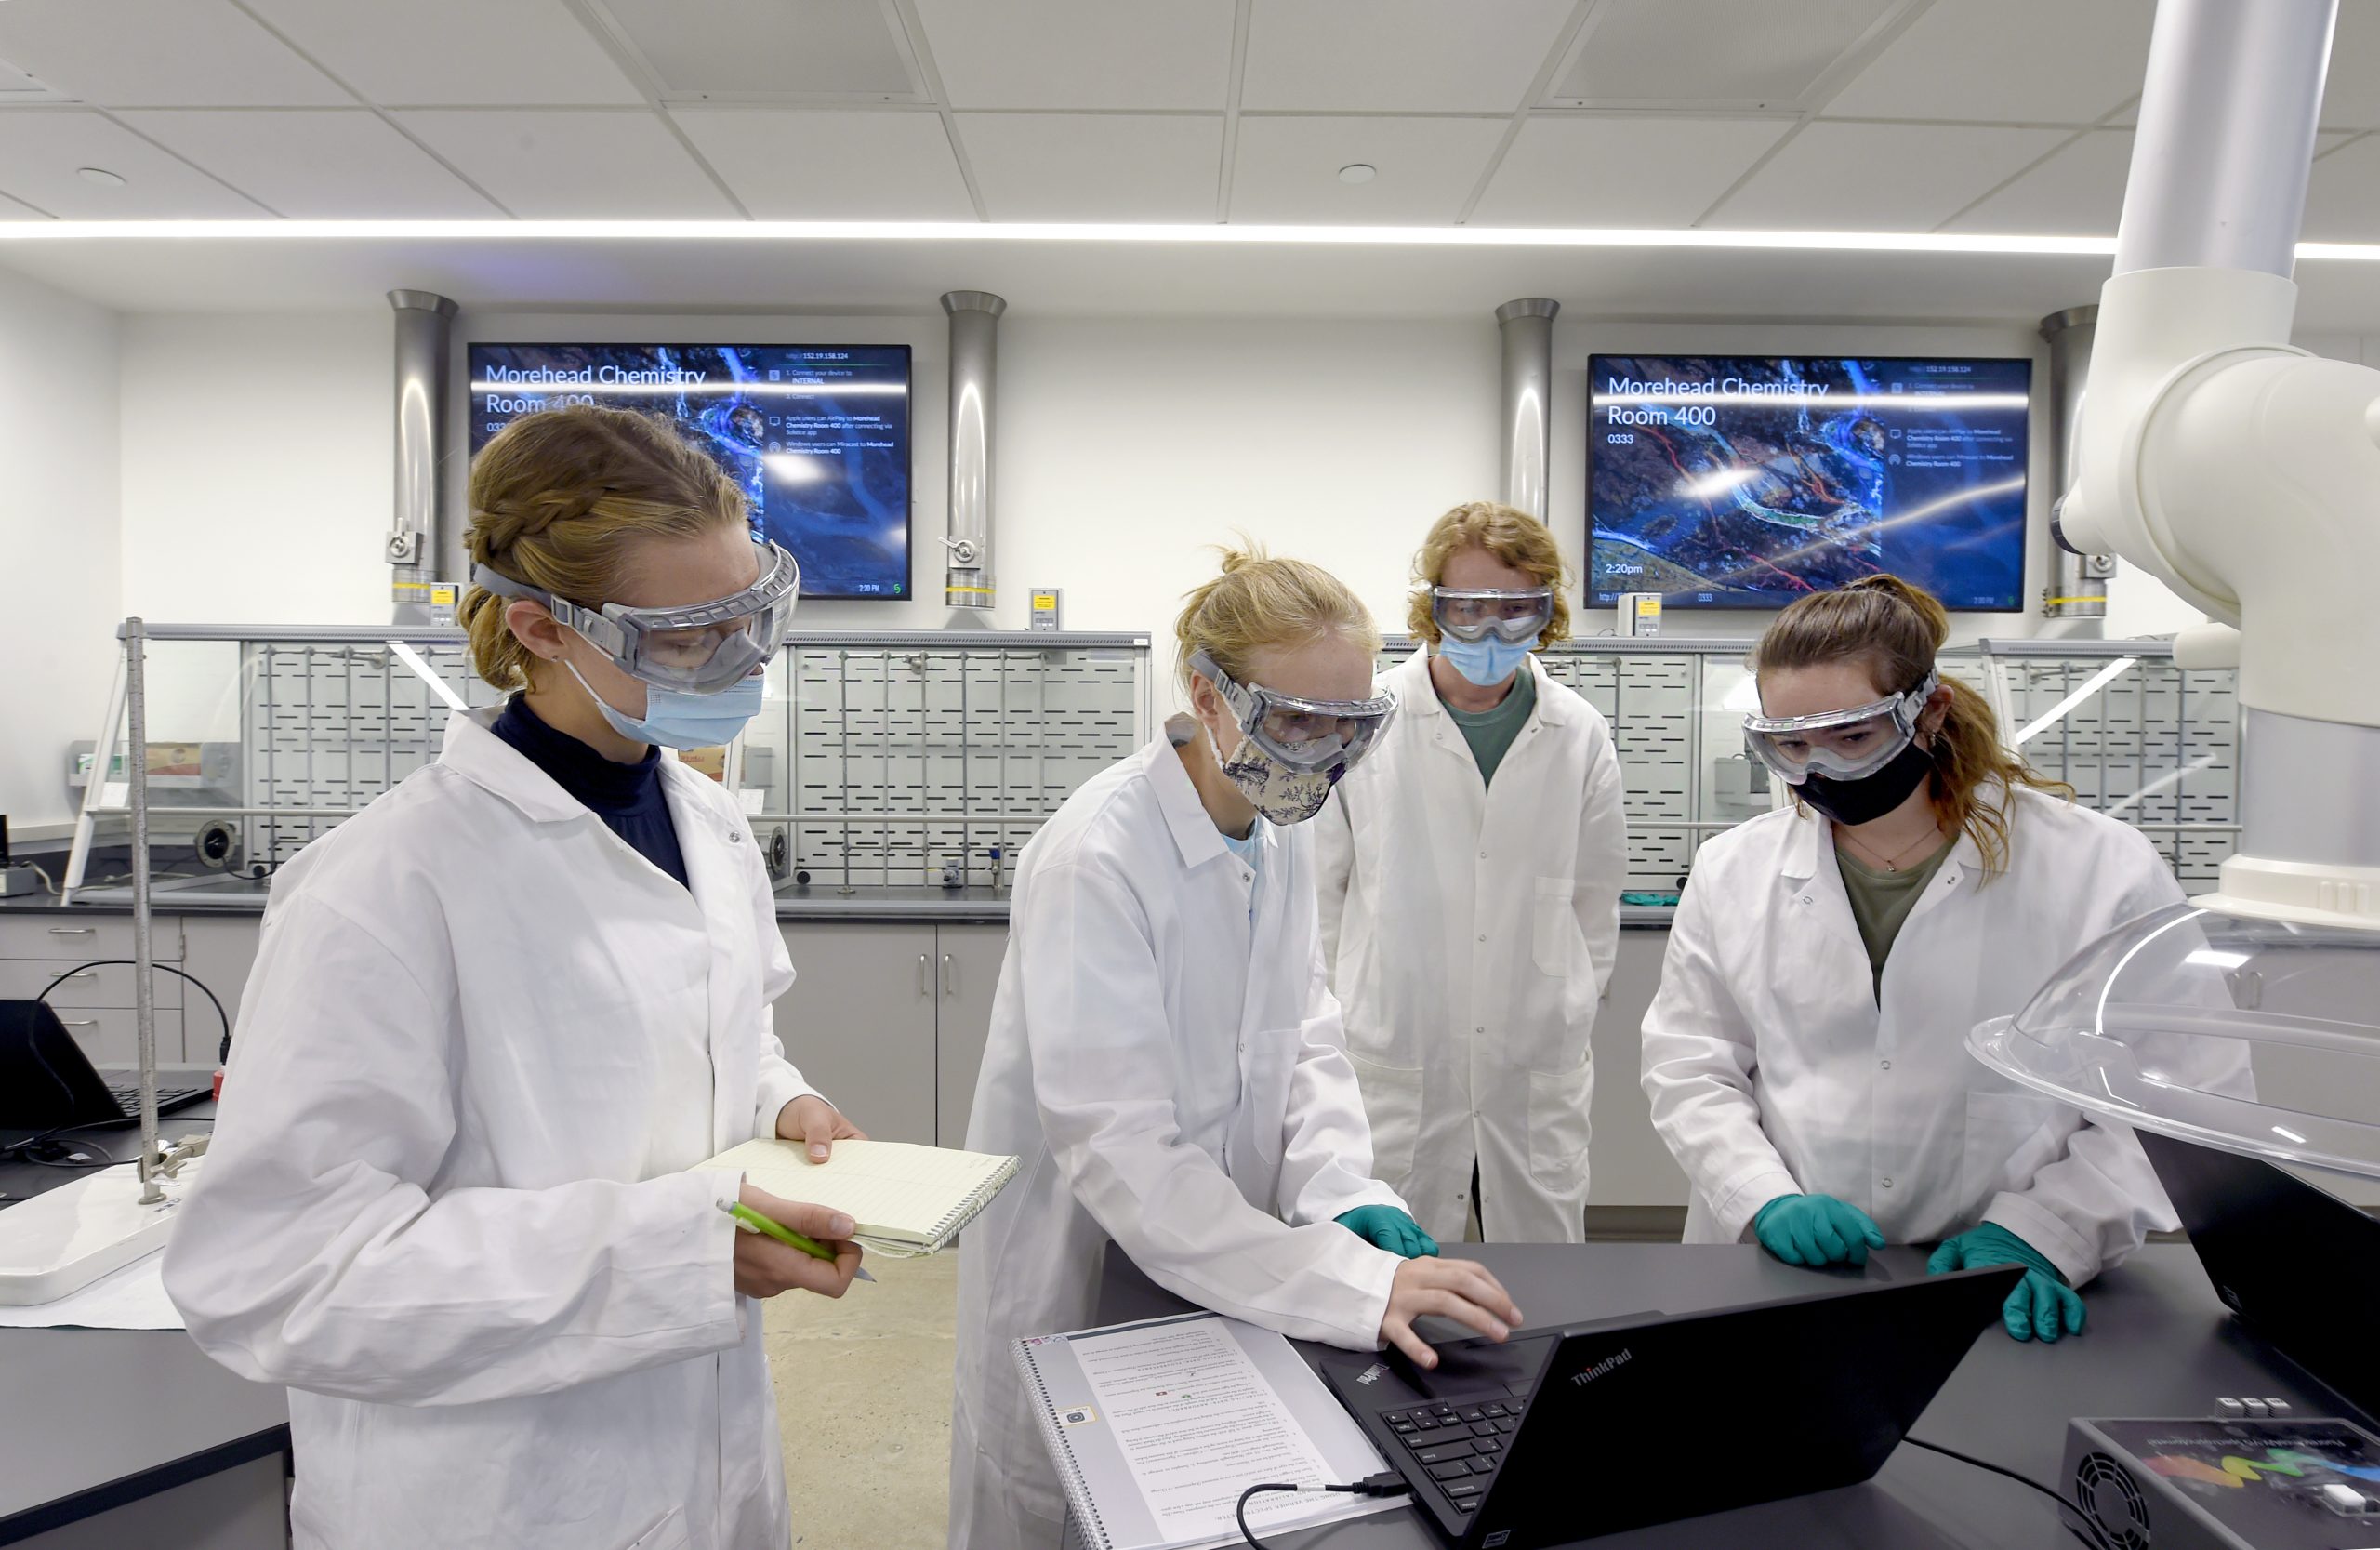 Students in lab coats and masks stand around a monitor in the lab.